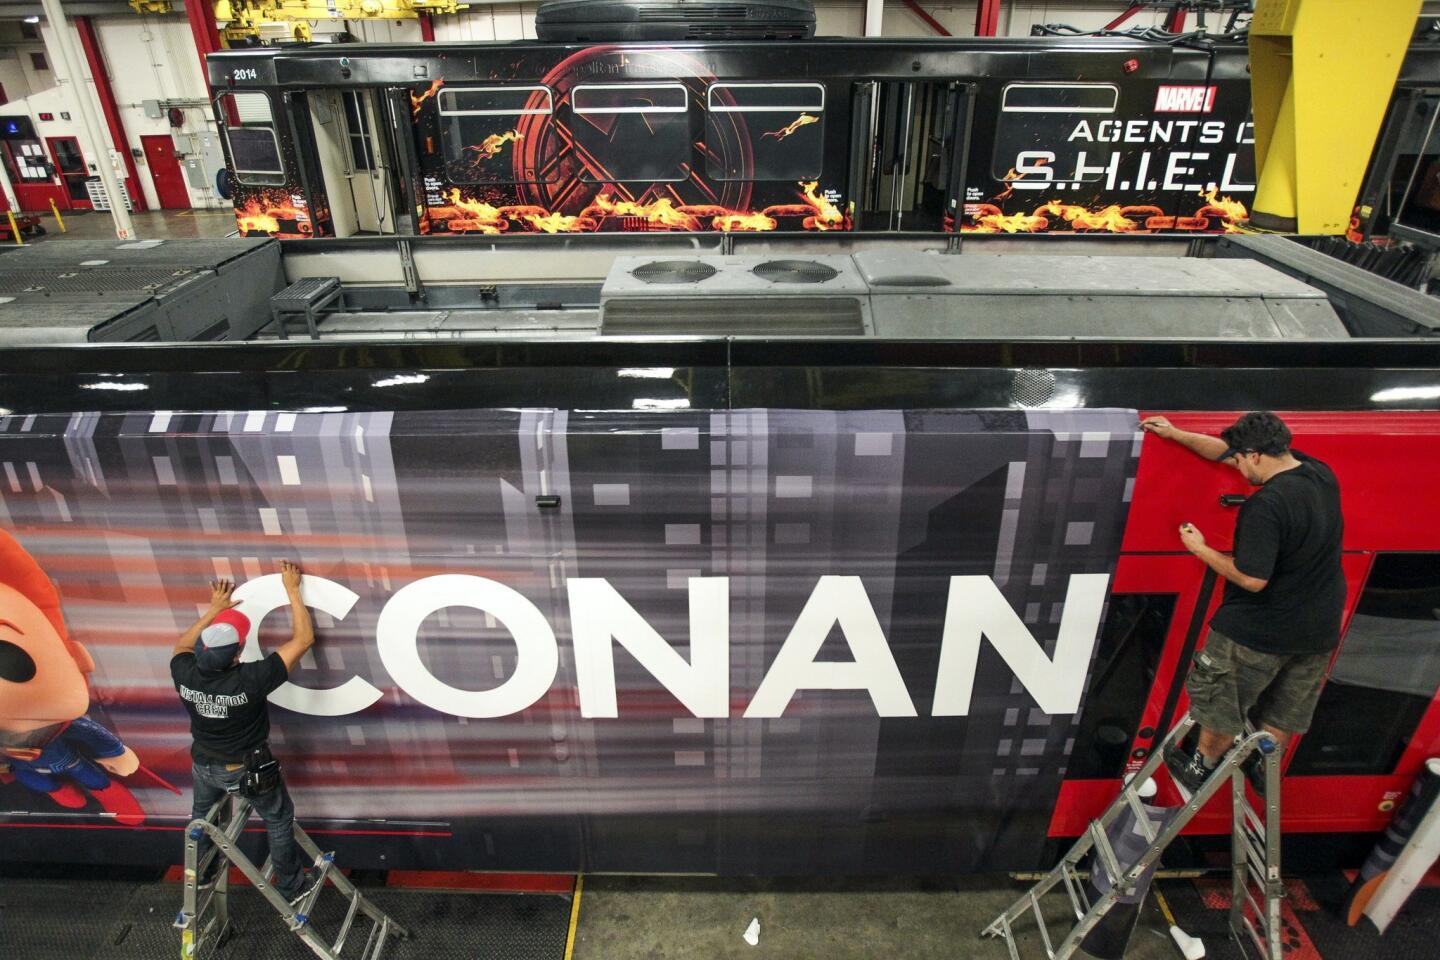 David Garcia, right, and Oscar Santos put on a section of transit vinyl as they and a crew put on an advertising wrap for TBS television host Conan O'Brien's talk show on a trolley car.